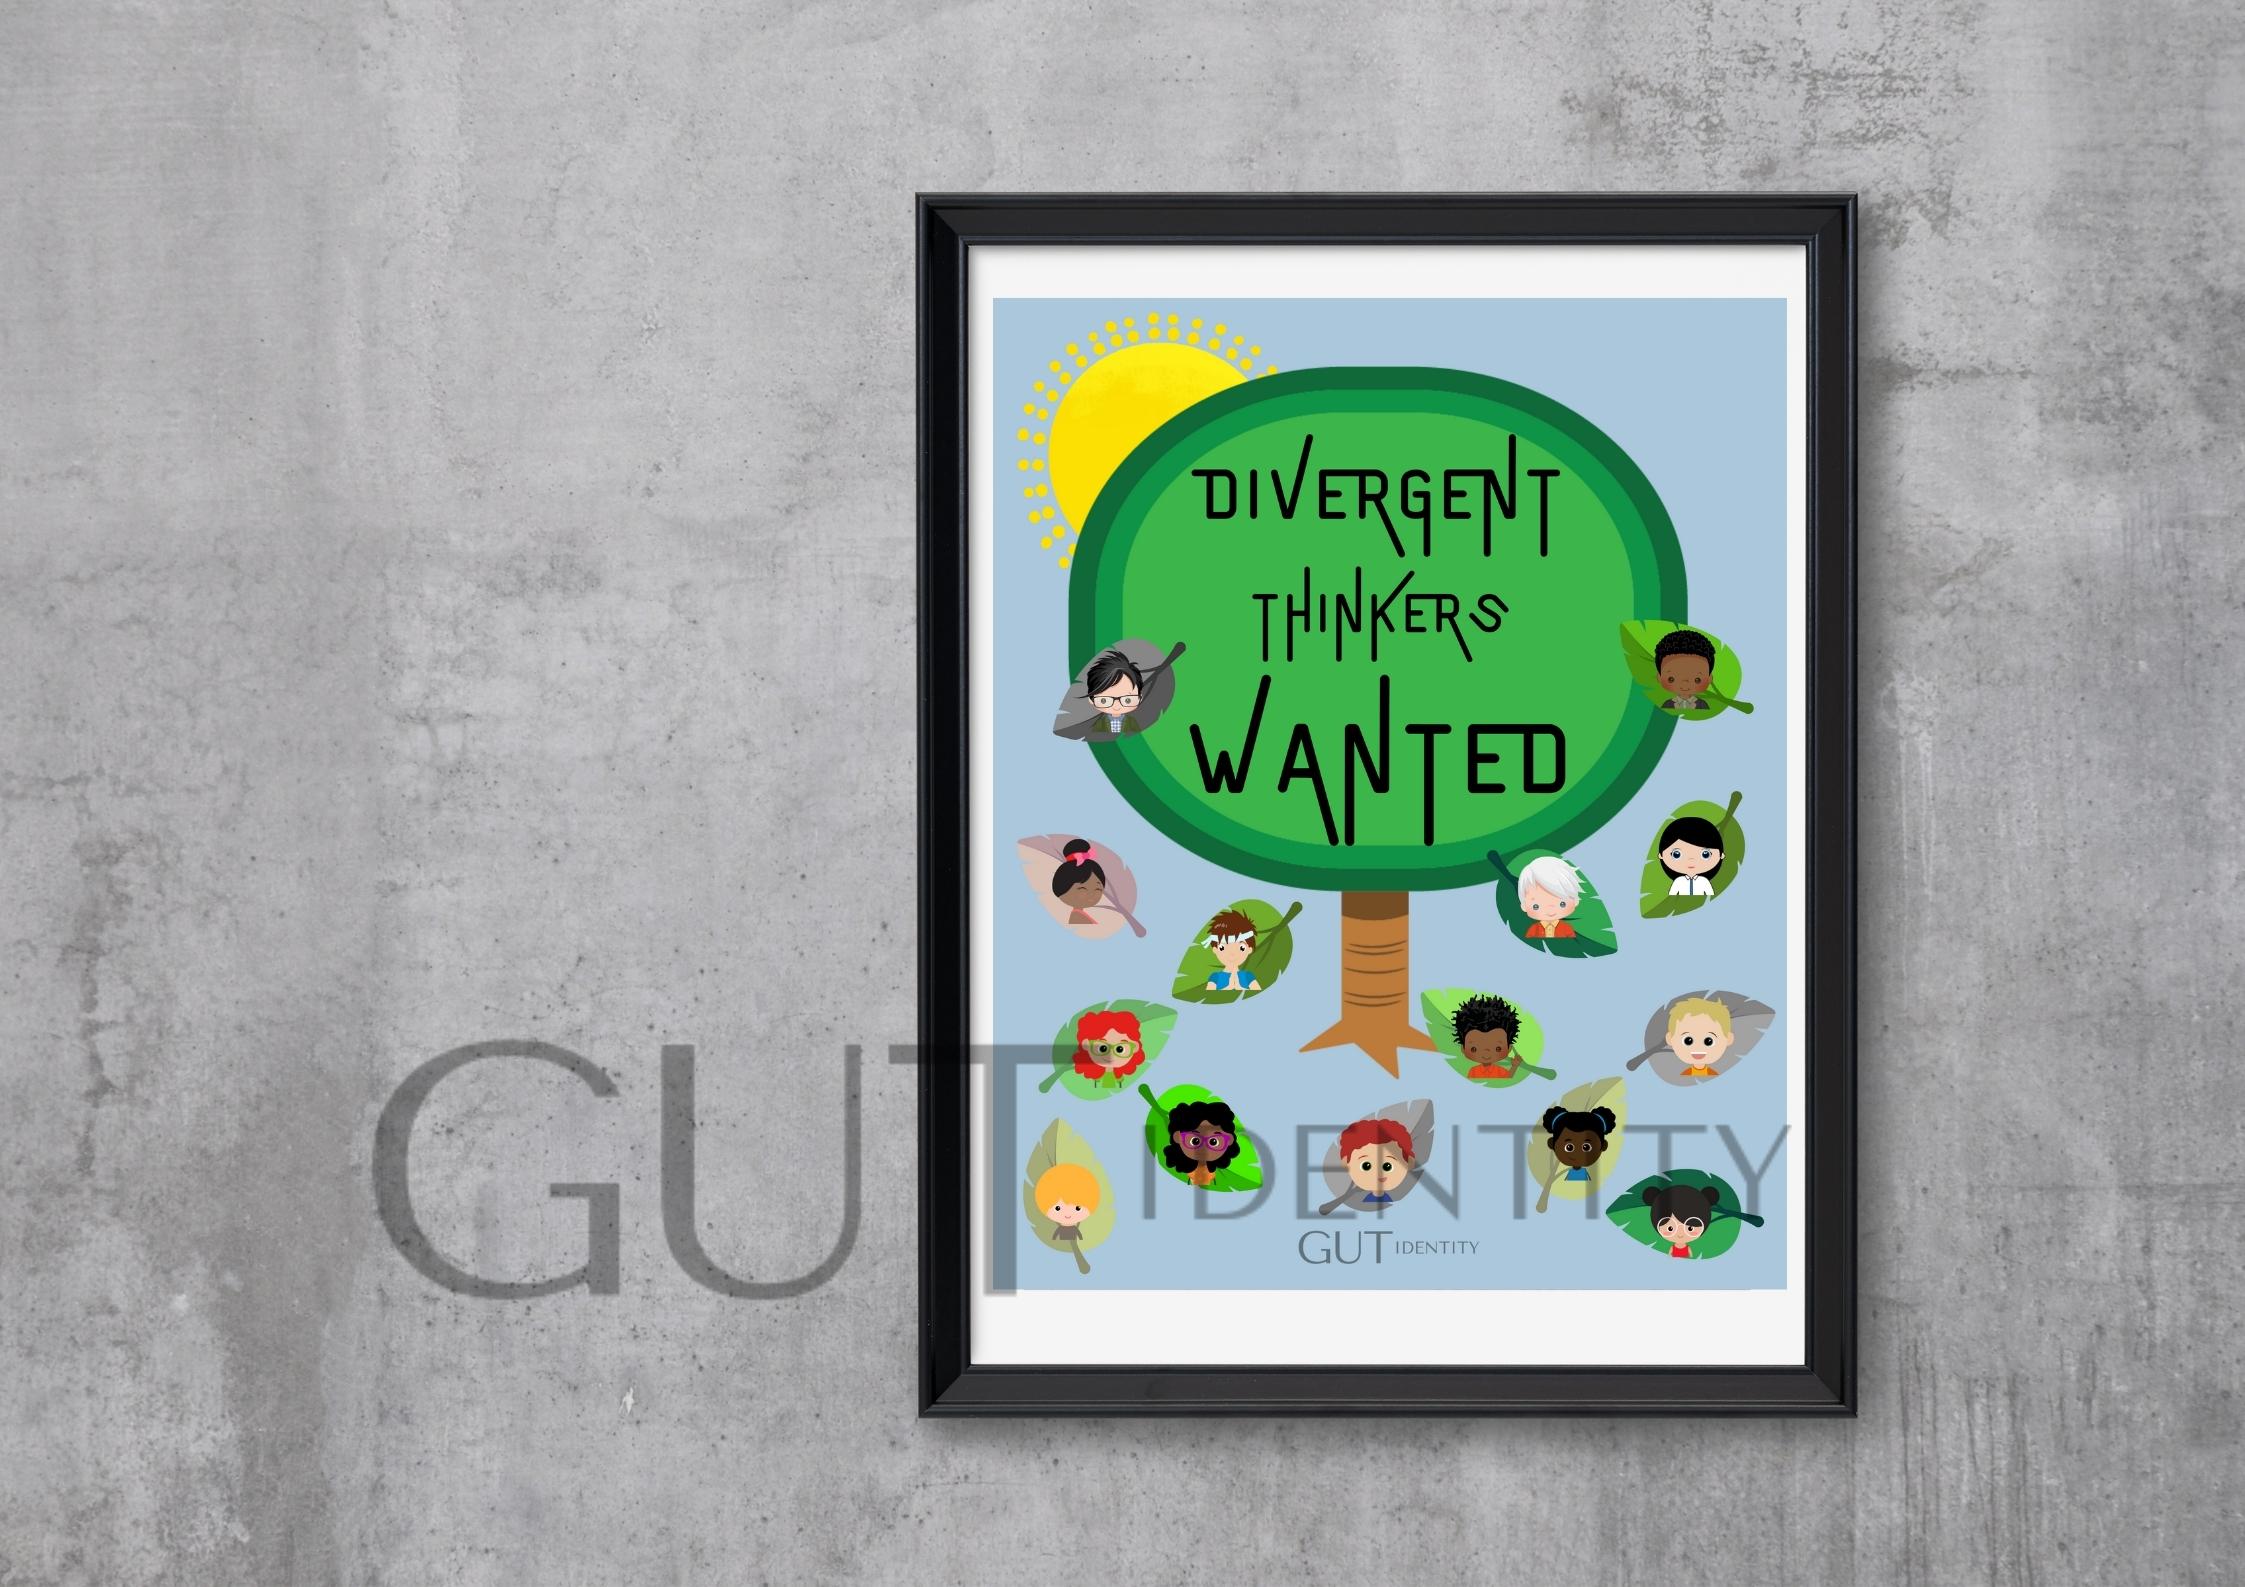 Divergent Thinkers Wanted by Gutidentity on Etsy